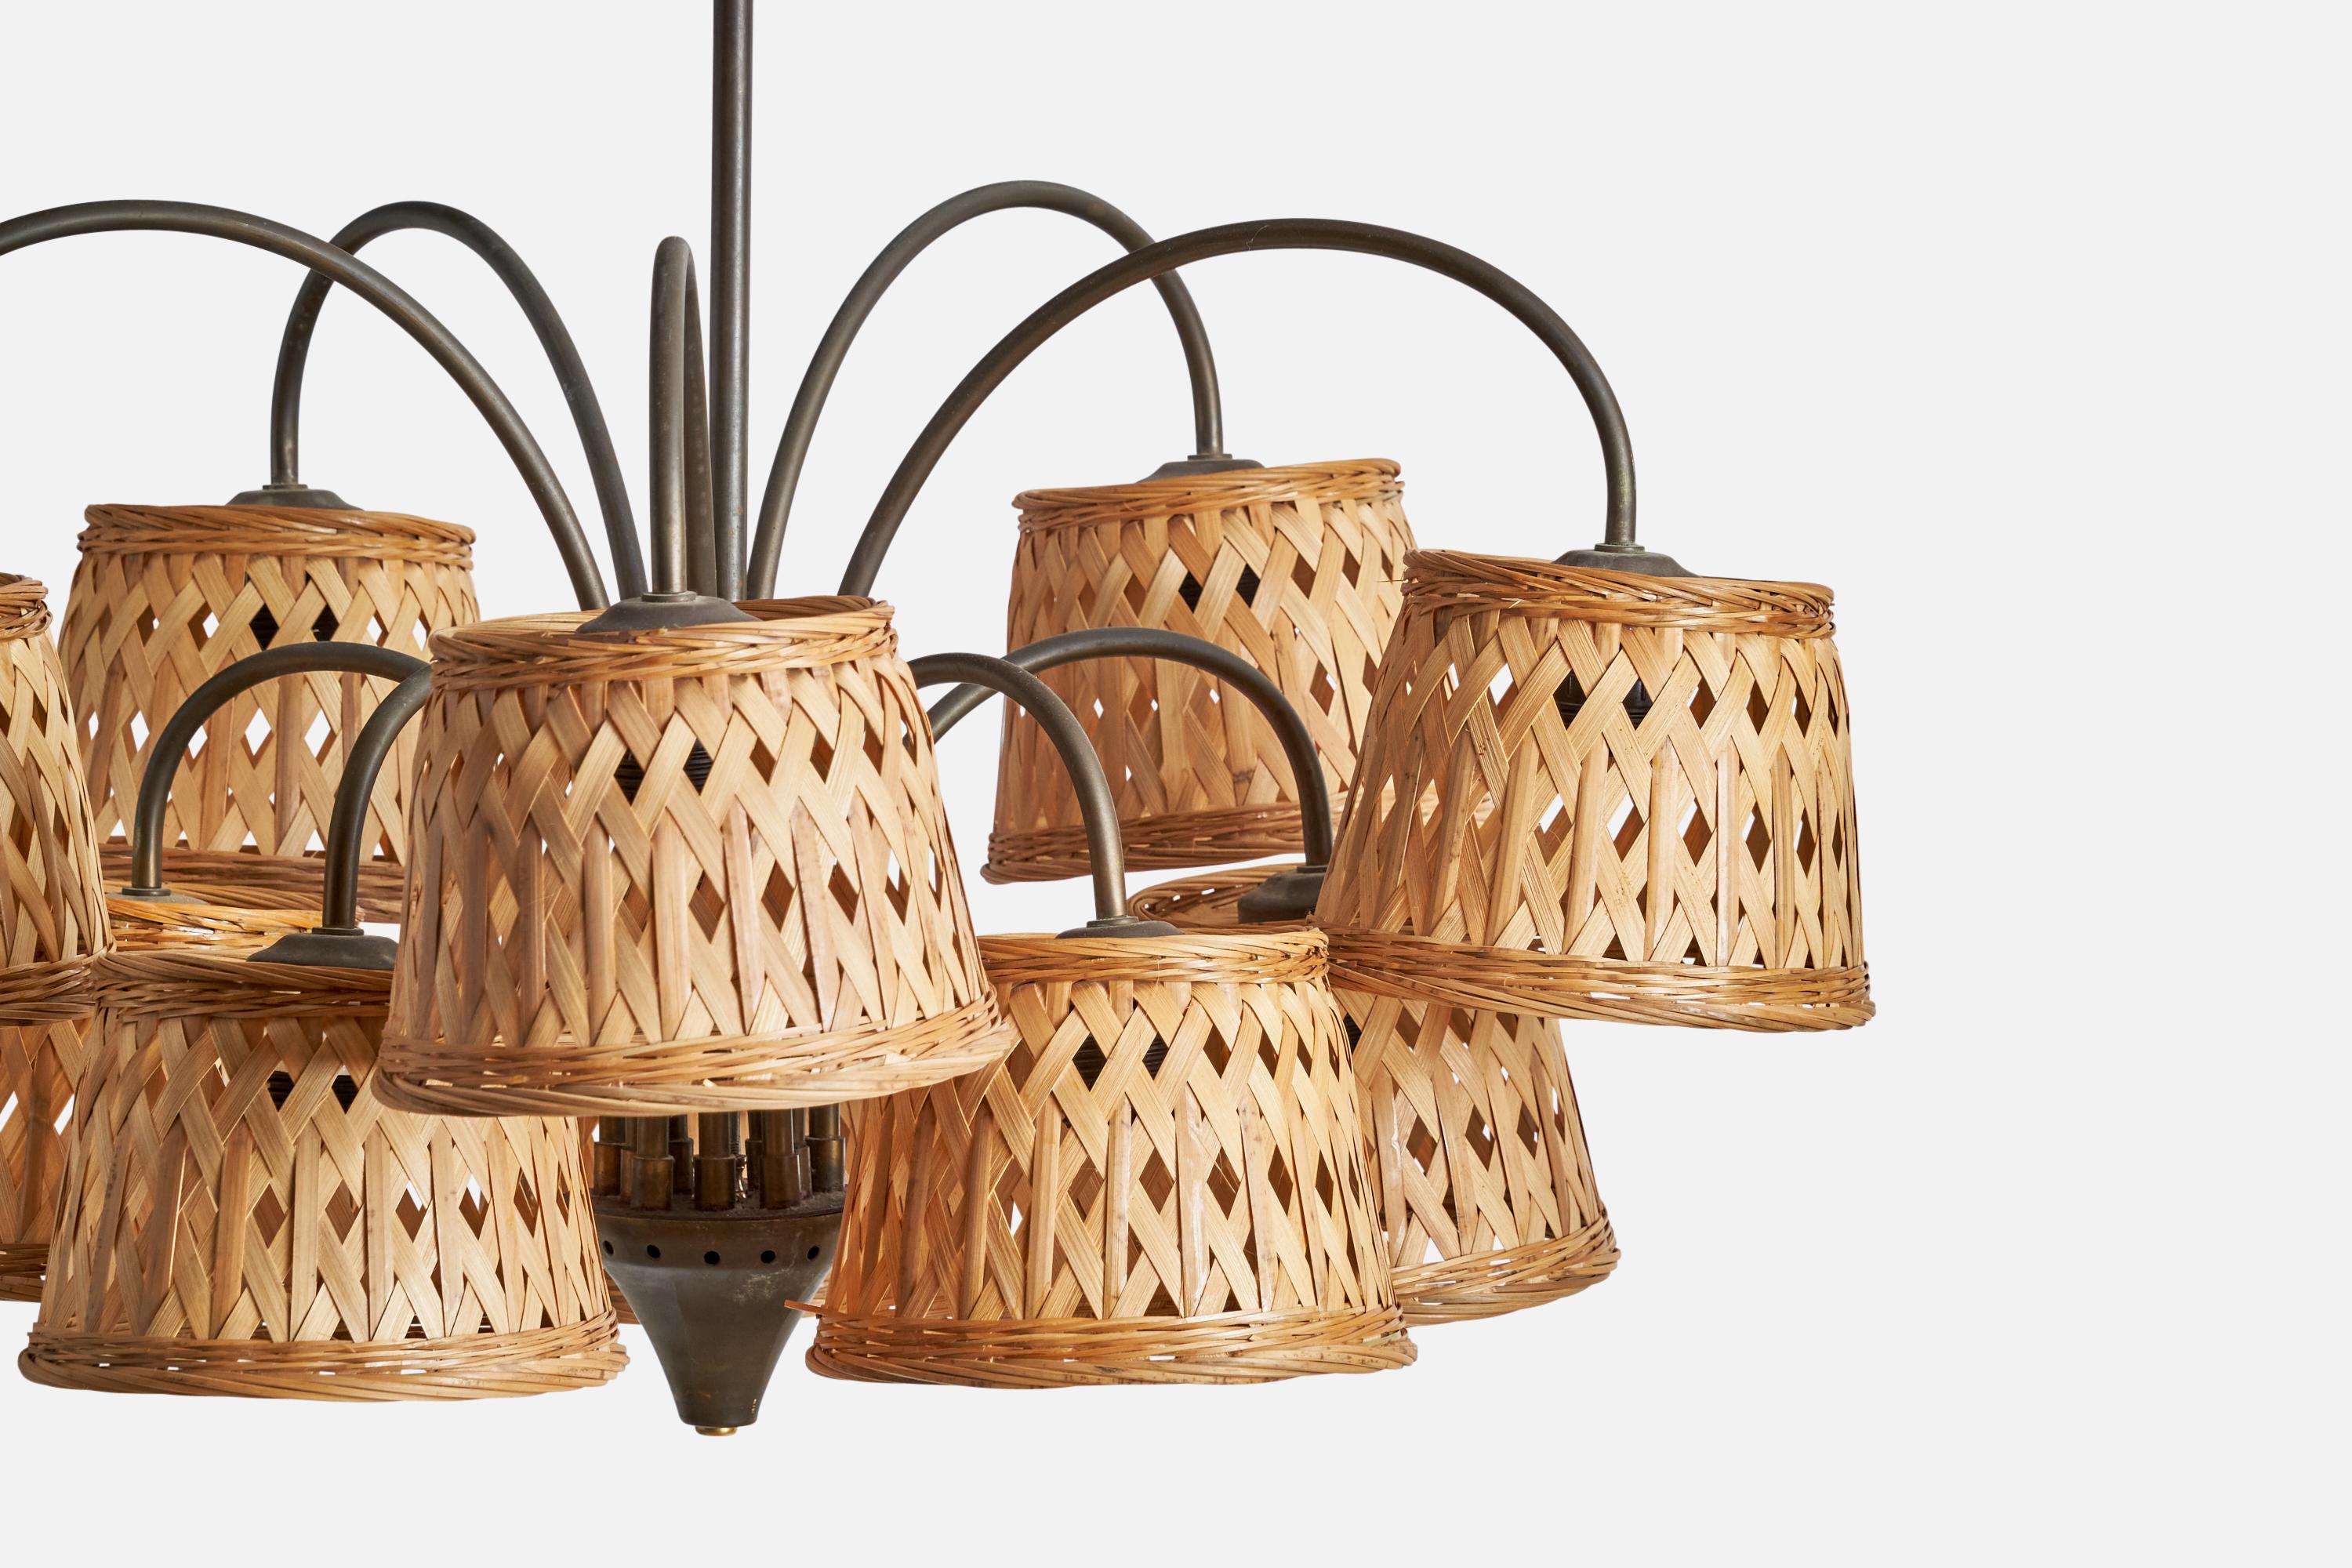 Fog & Mørup, Chandelier, Brass, Rattan, Denmark, 1940s In Good Condition For Sale In High Point, NC